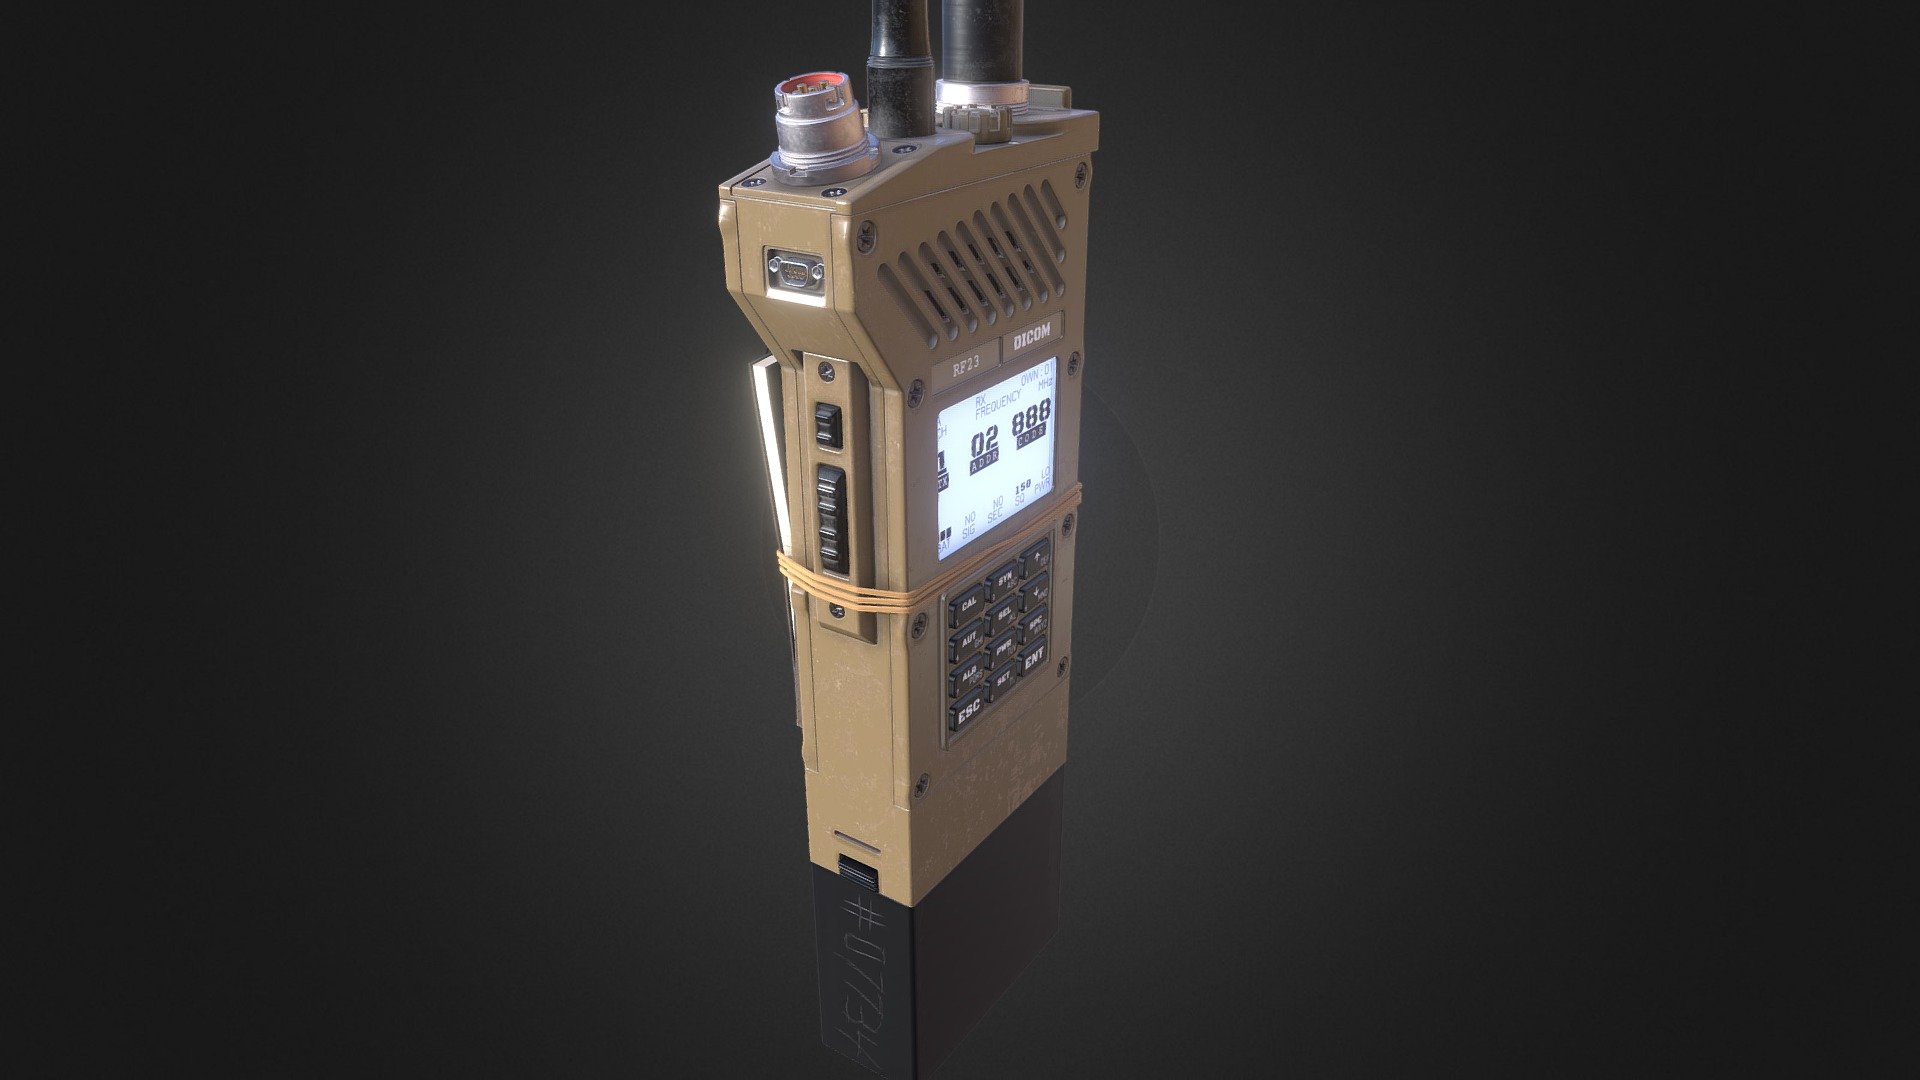 This is the asset I created for my Portfolio 6 class, a DICOM RF23 communications radio. Game ready with a high resolution bake. Modeled in Maya, texured with Substance Painter 3d model